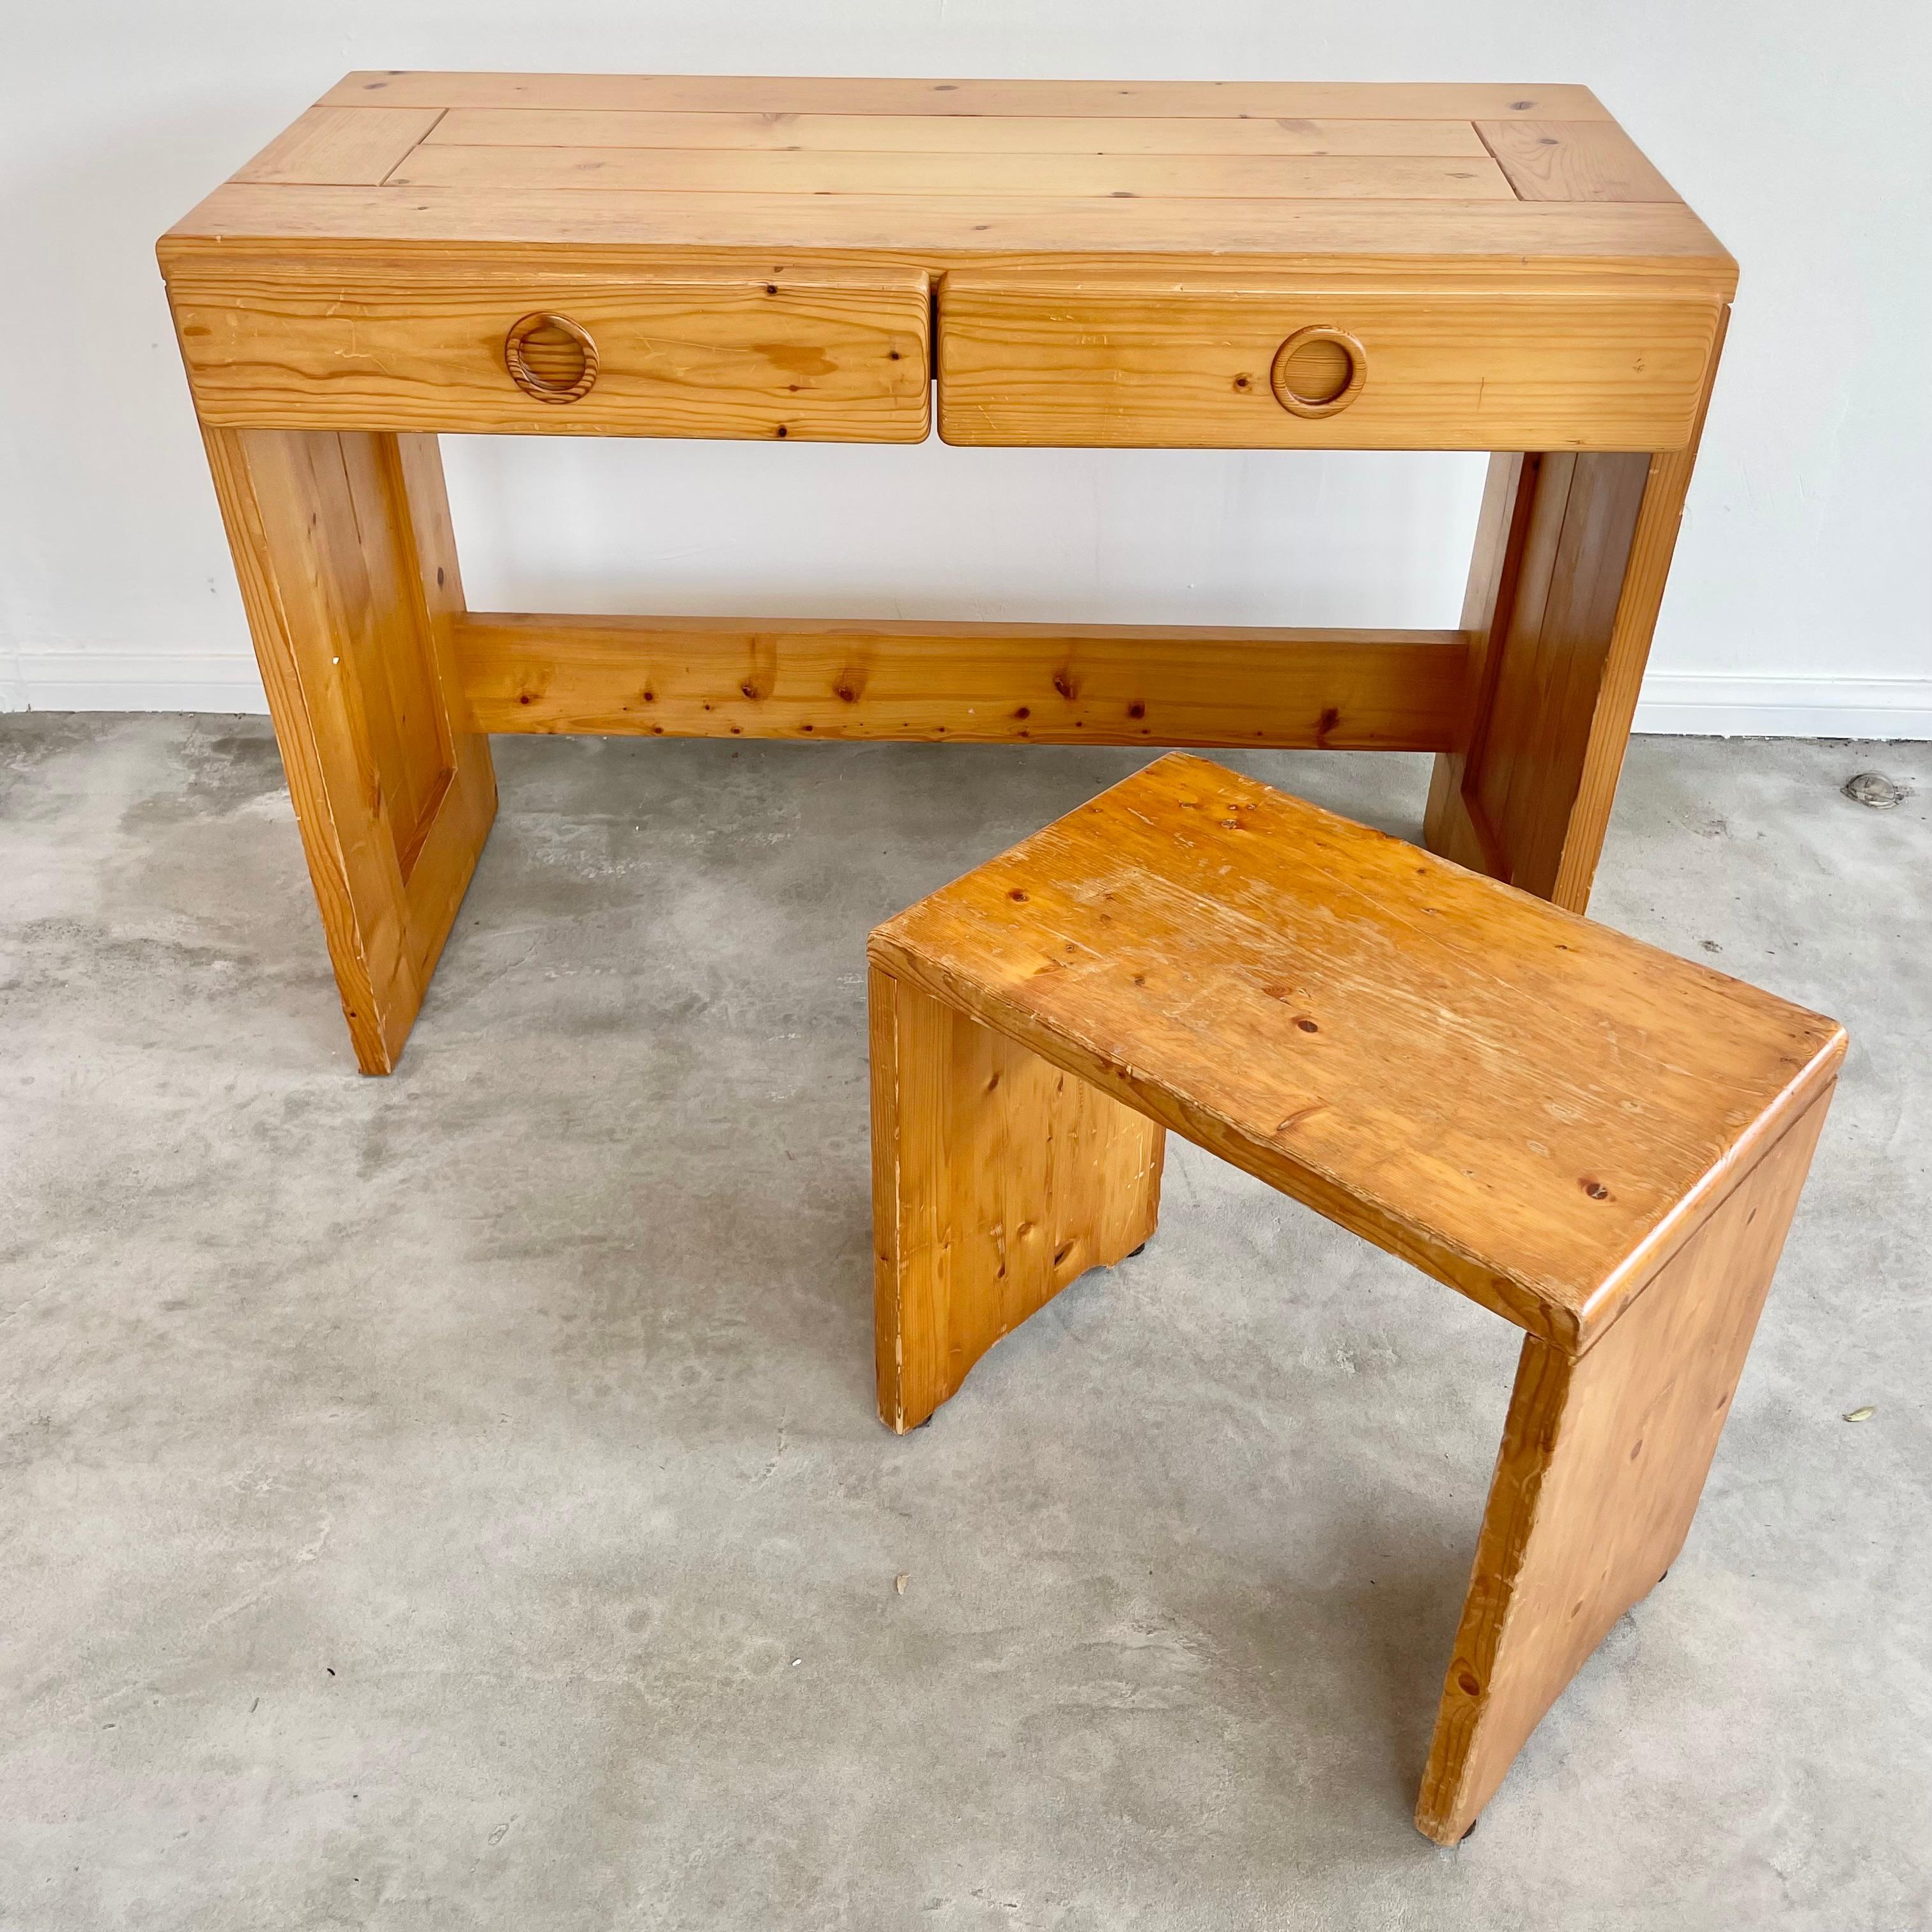 Rare Charlotte Perriand desk for Les Arcs. Circa 1960s. Comes with matching stool. This solid pine table can be used as a console or writing desk. Beautiful vintage condition and wear. Great vintage condition. Highly collectible piece of Charlotte